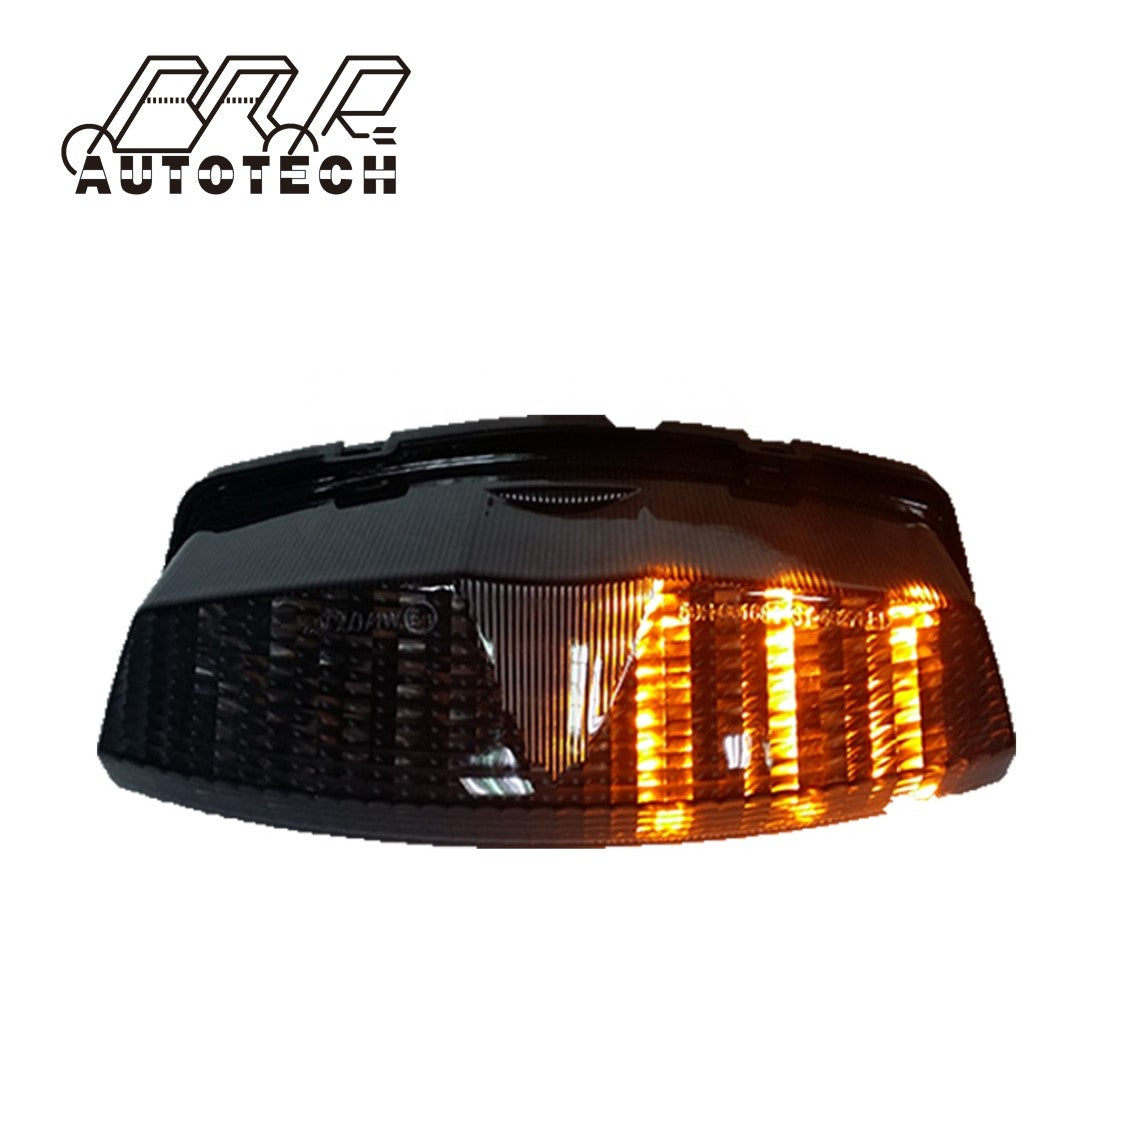 For Kawasaki ZXR 750 400 250 integrated motorcycle tail lights for rear brake led lamp